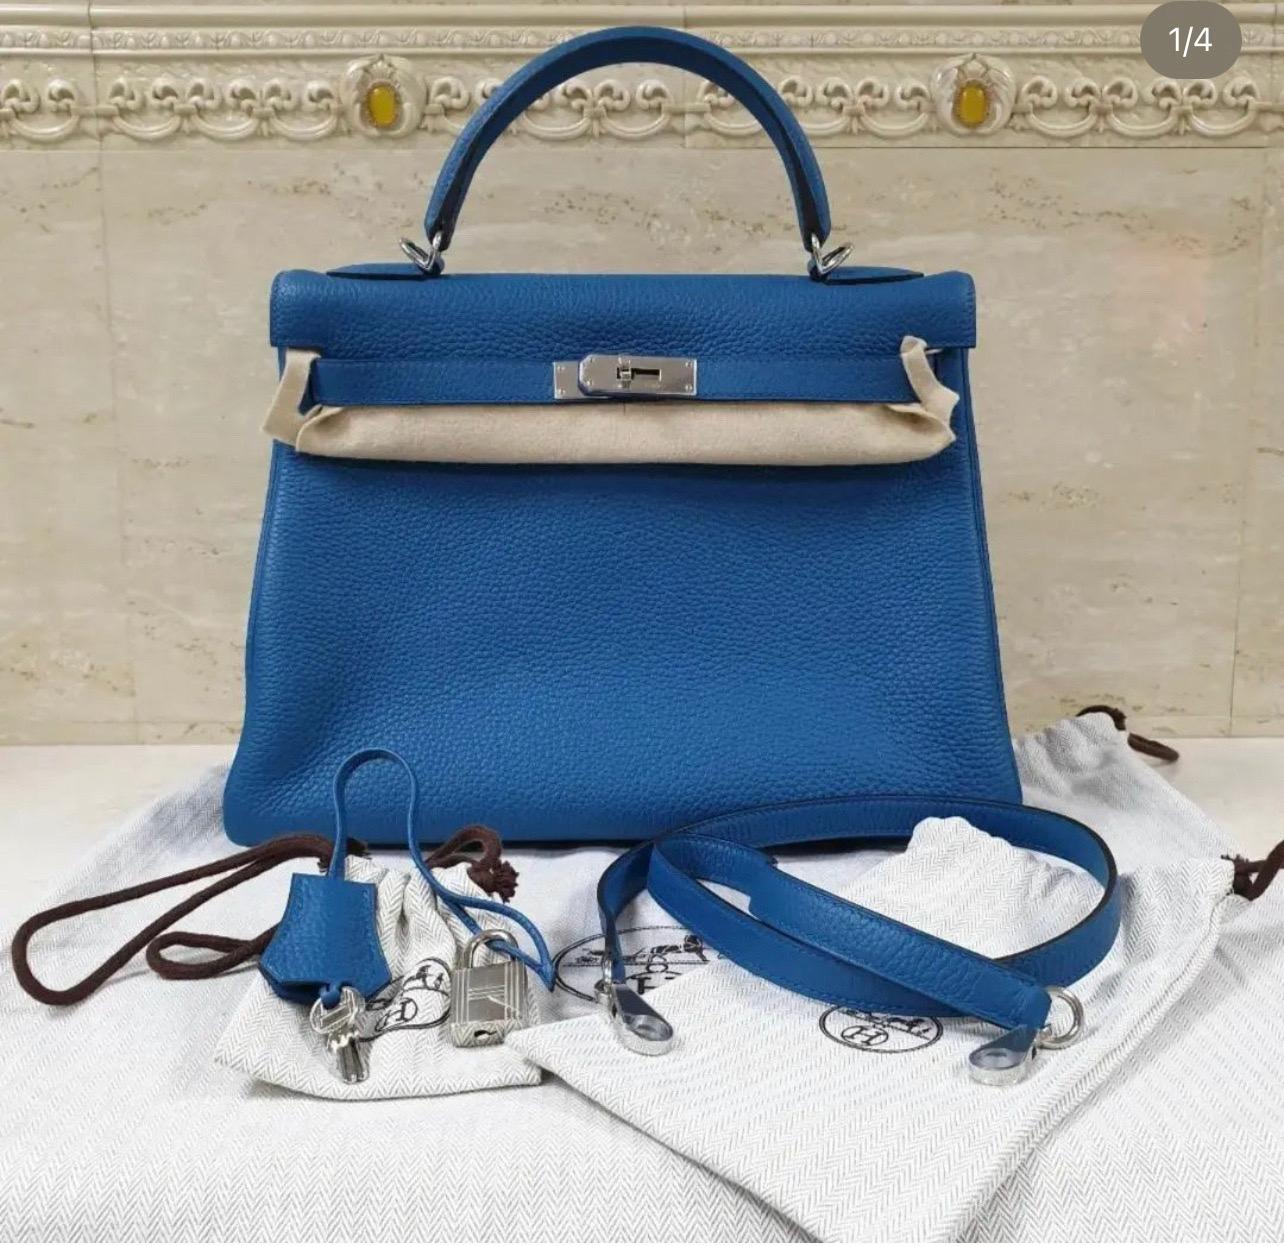 
Model: Kelly
Size: 32 cm
Color: Blue Hydra
Material: Veau Togo Leather

HW: Palladium plated
Year: 2015 T

Never worn. No box. No receipt.
Has Bababebi certificate.